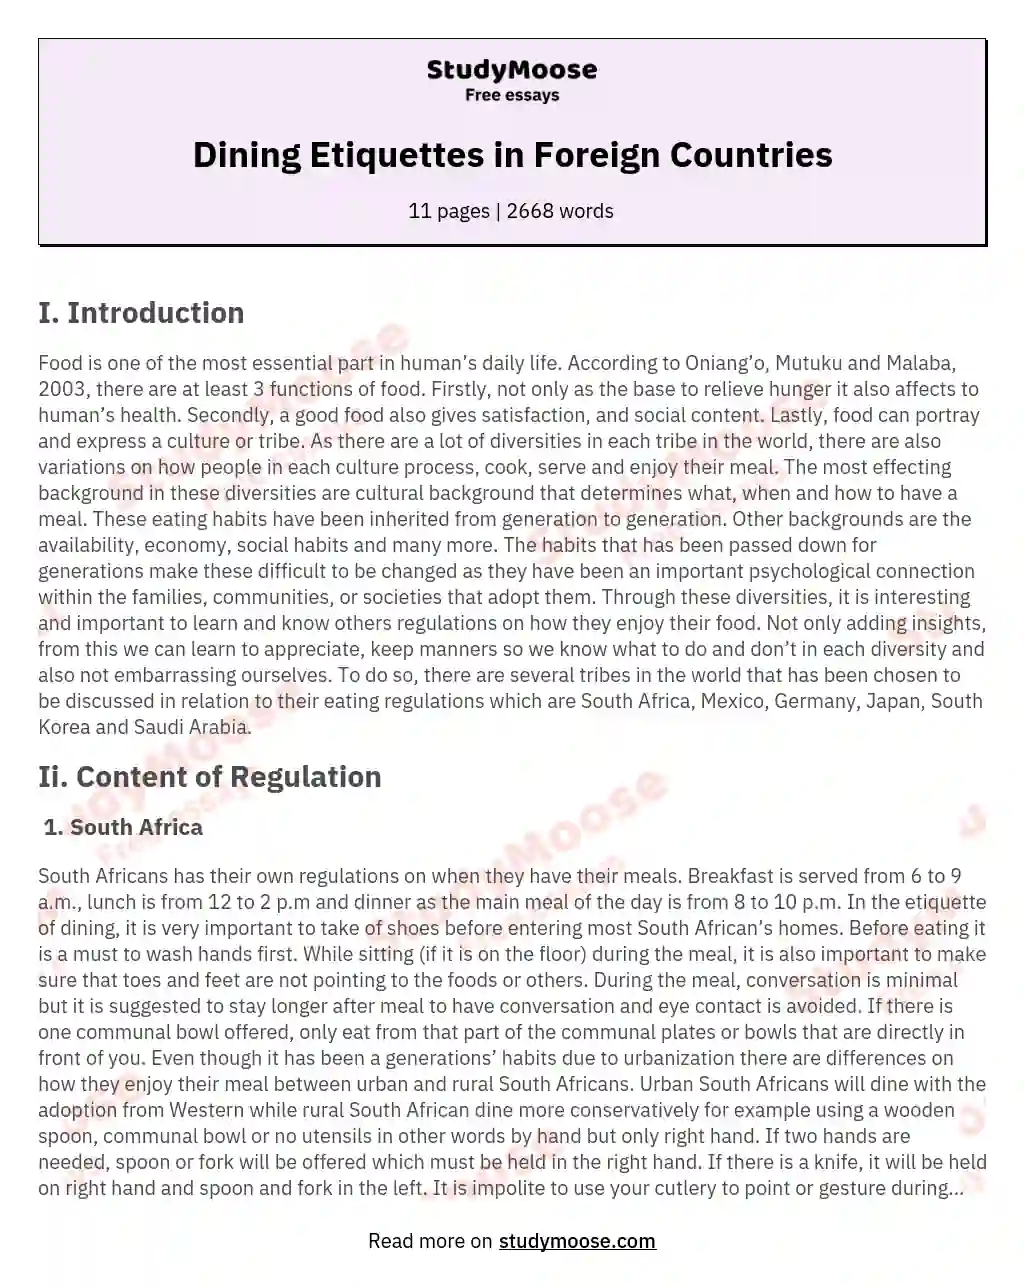 Dining Etiquettes in Foreign Countries essay